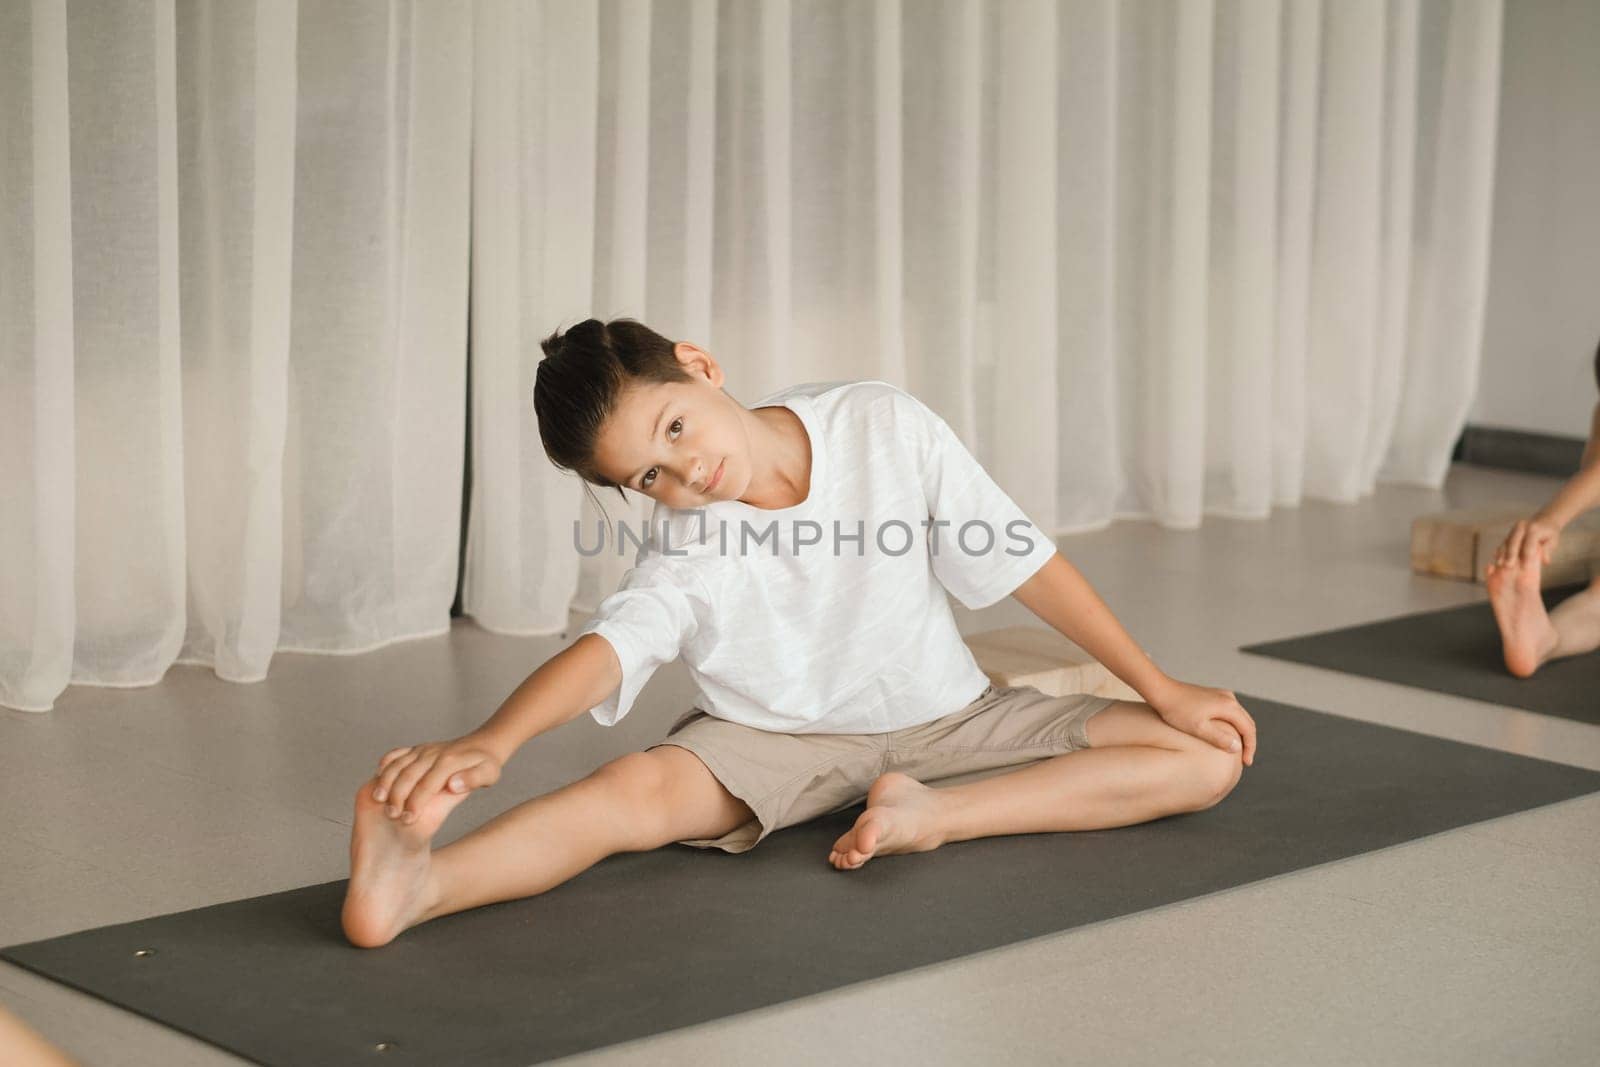 A child does yoga in the gym. Children's gymnastics by Lobachad